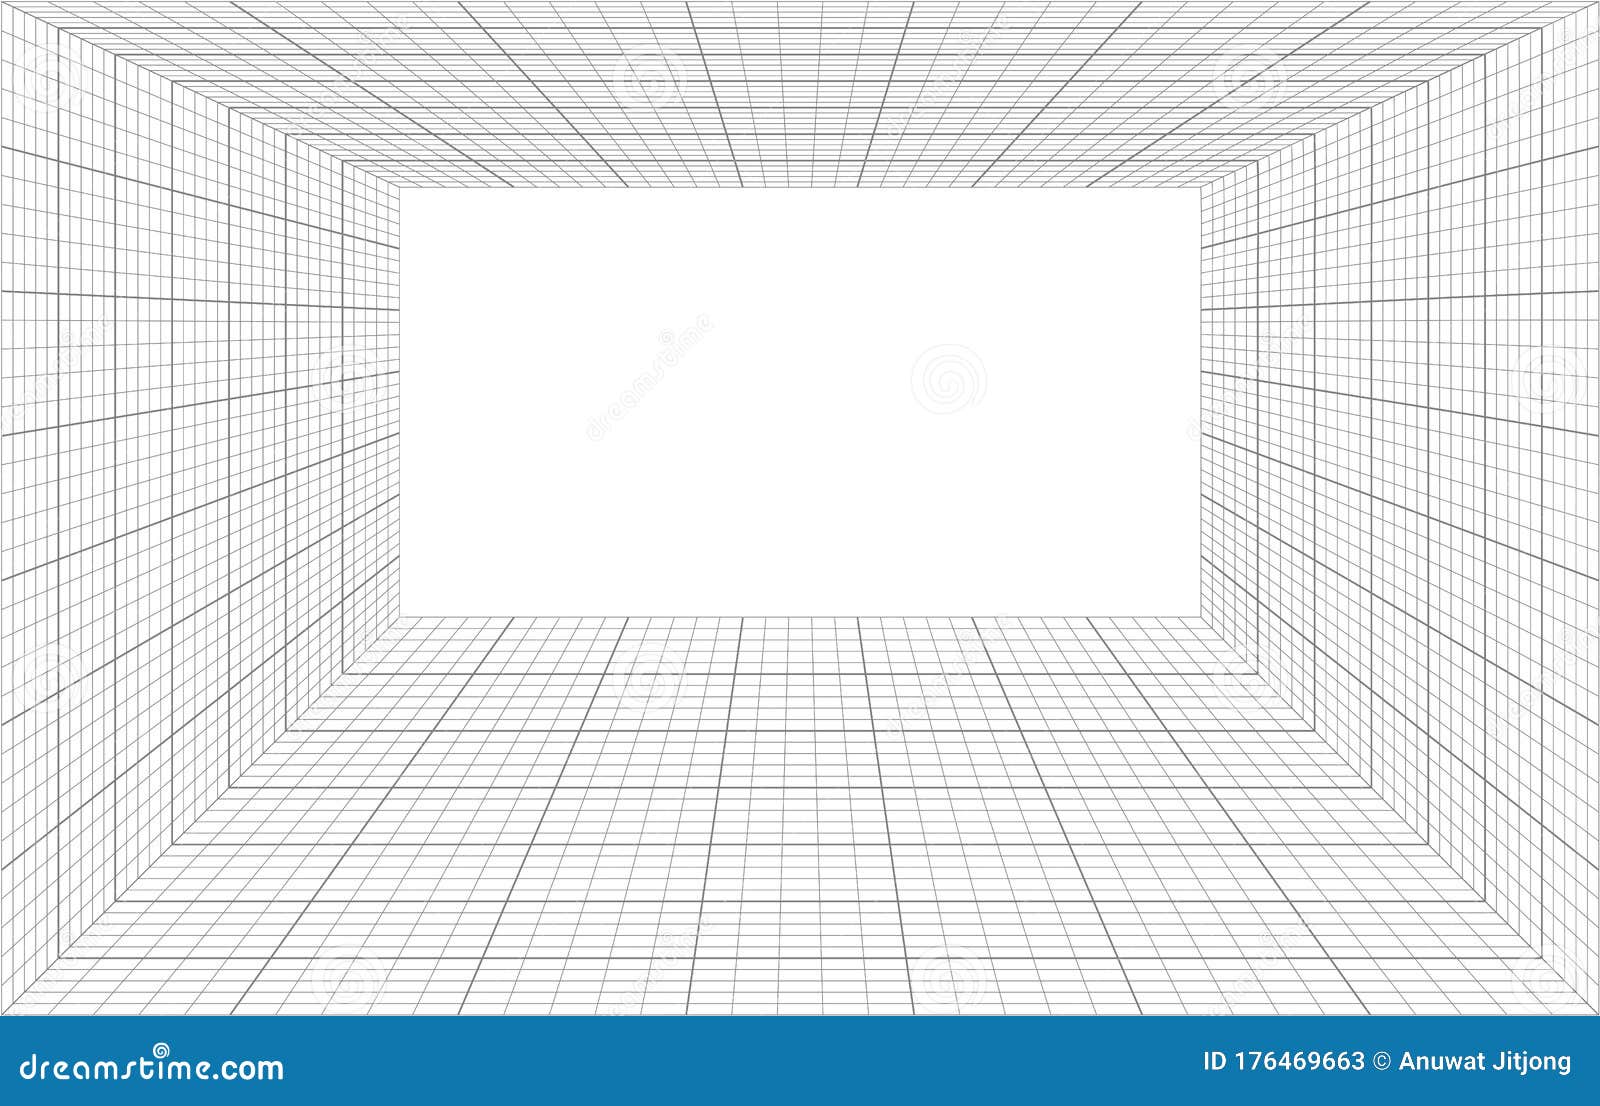 Room Perspective With Thin And Bold Grid Stock Vector - Illustration of